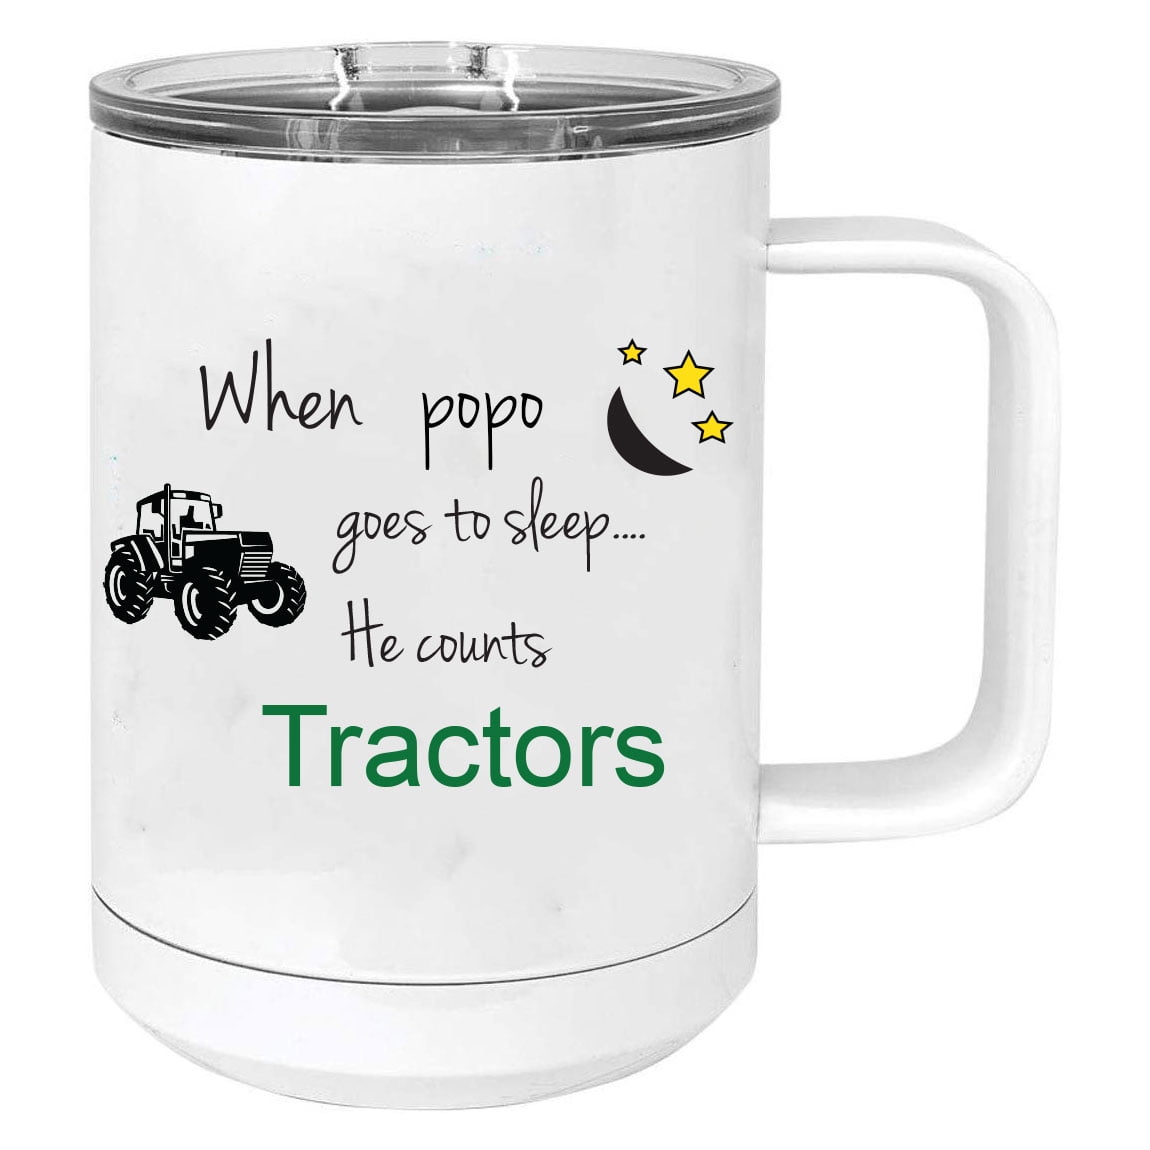 When Popo goes to sleep he counts tractors Stainless Steel Vacuum Insulated 15 Oz Travel Coffee Mug with Slider Lid, White